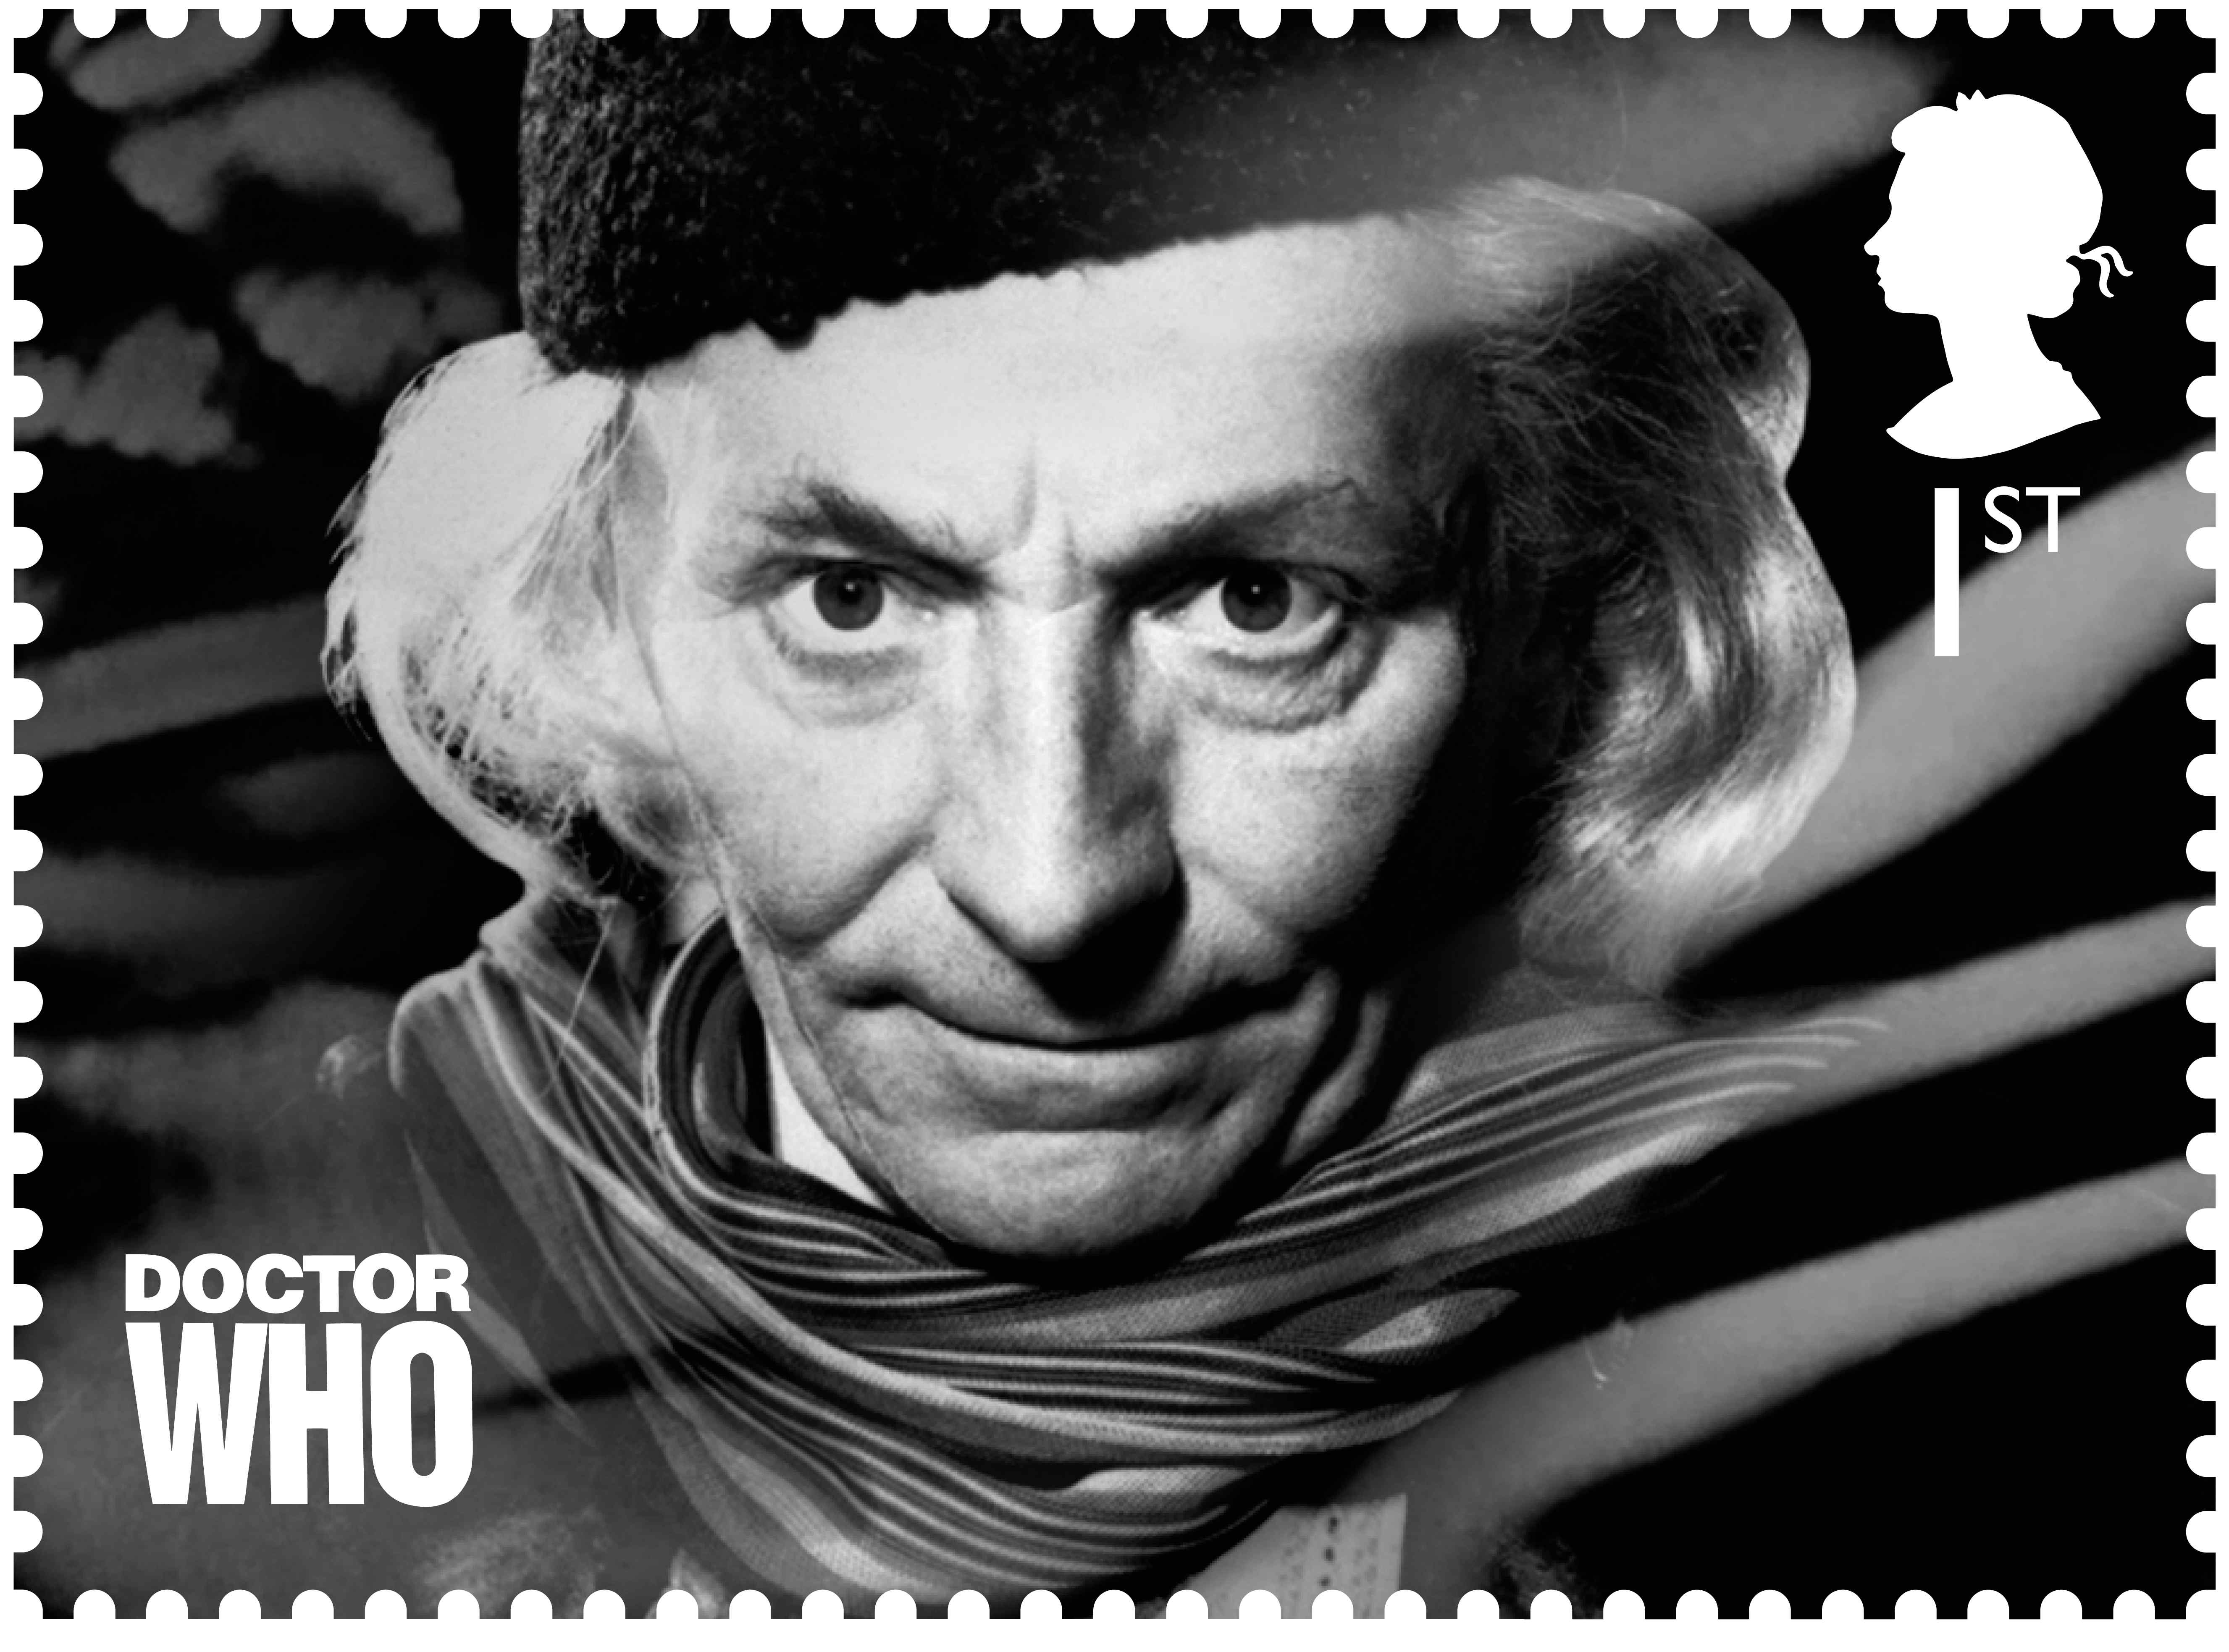 dr who william hartnell 1st stamp - About Time - new Royal Mail stamps mark Dr Who's 50th anniversary